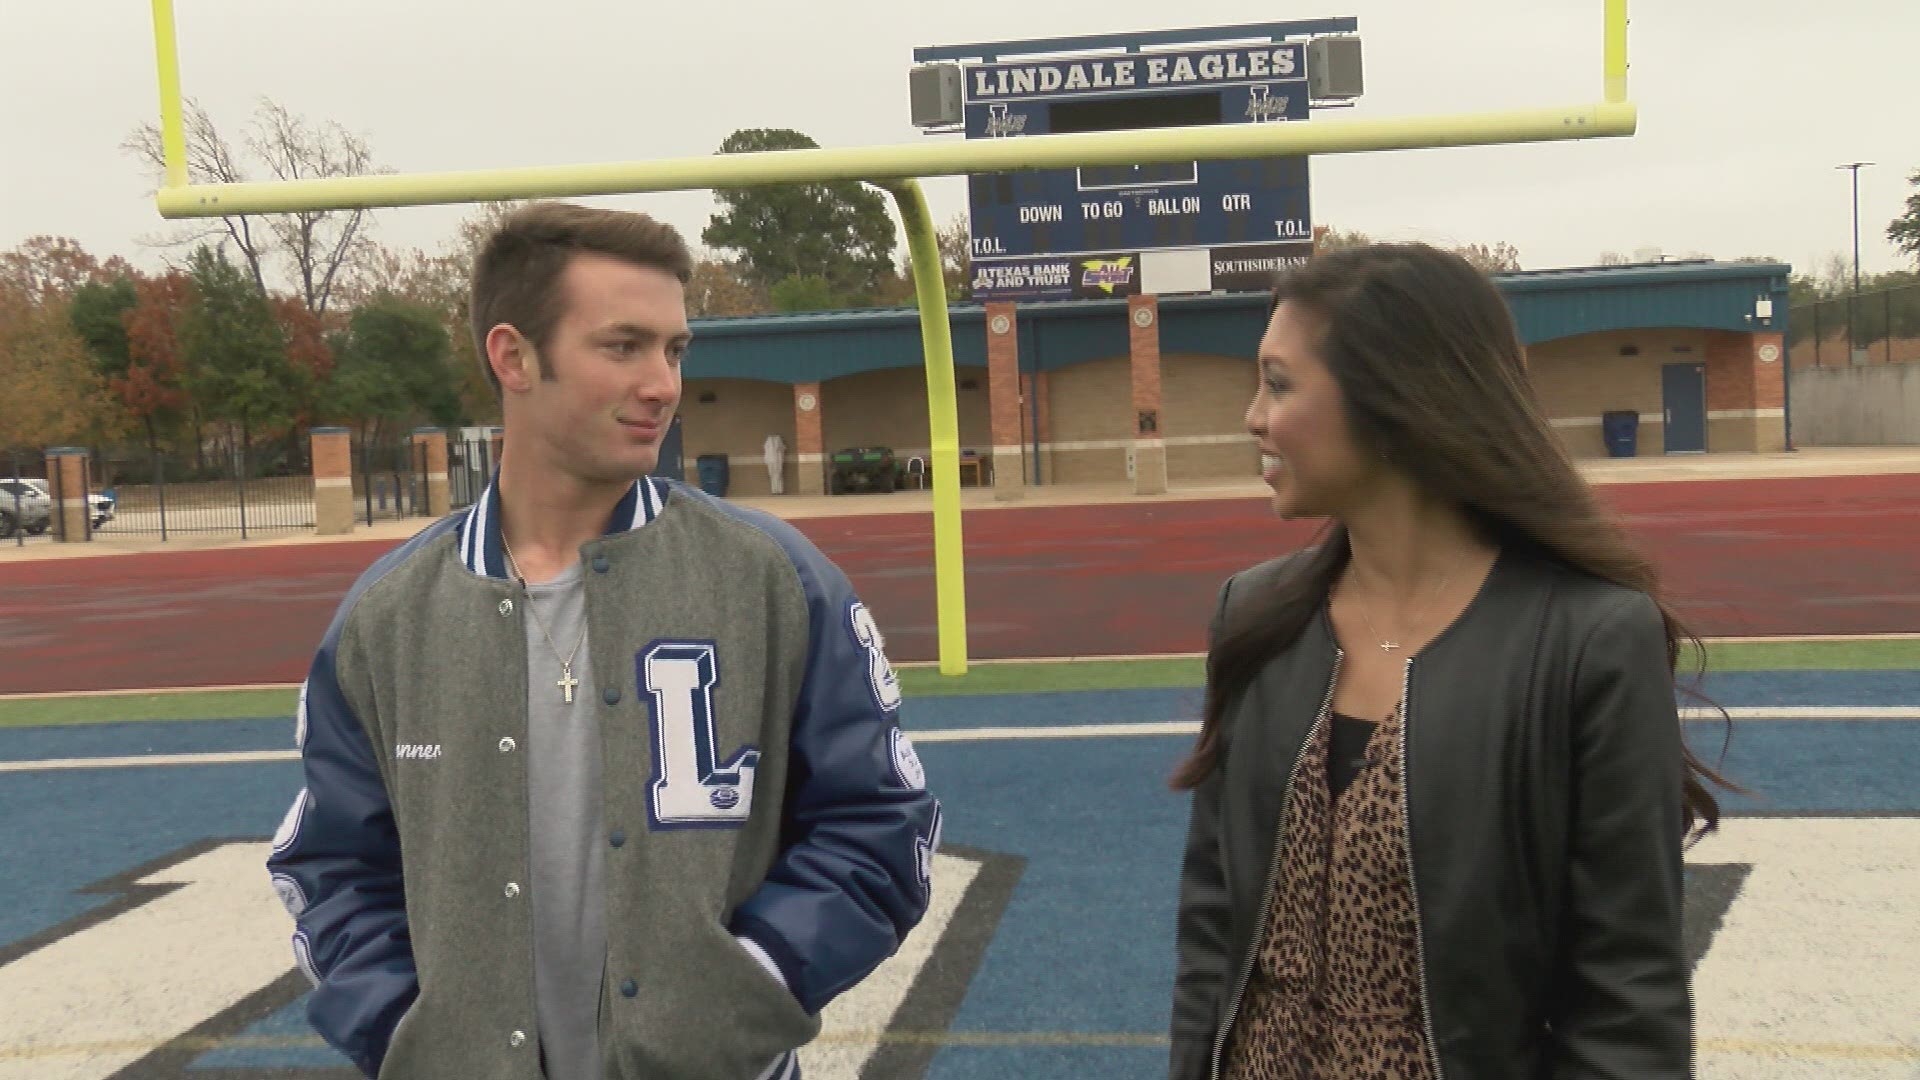 Get to know Lindale's wide receiver, Conner Boyette, as he highlights our next 100-yards with Tina Nguyen.